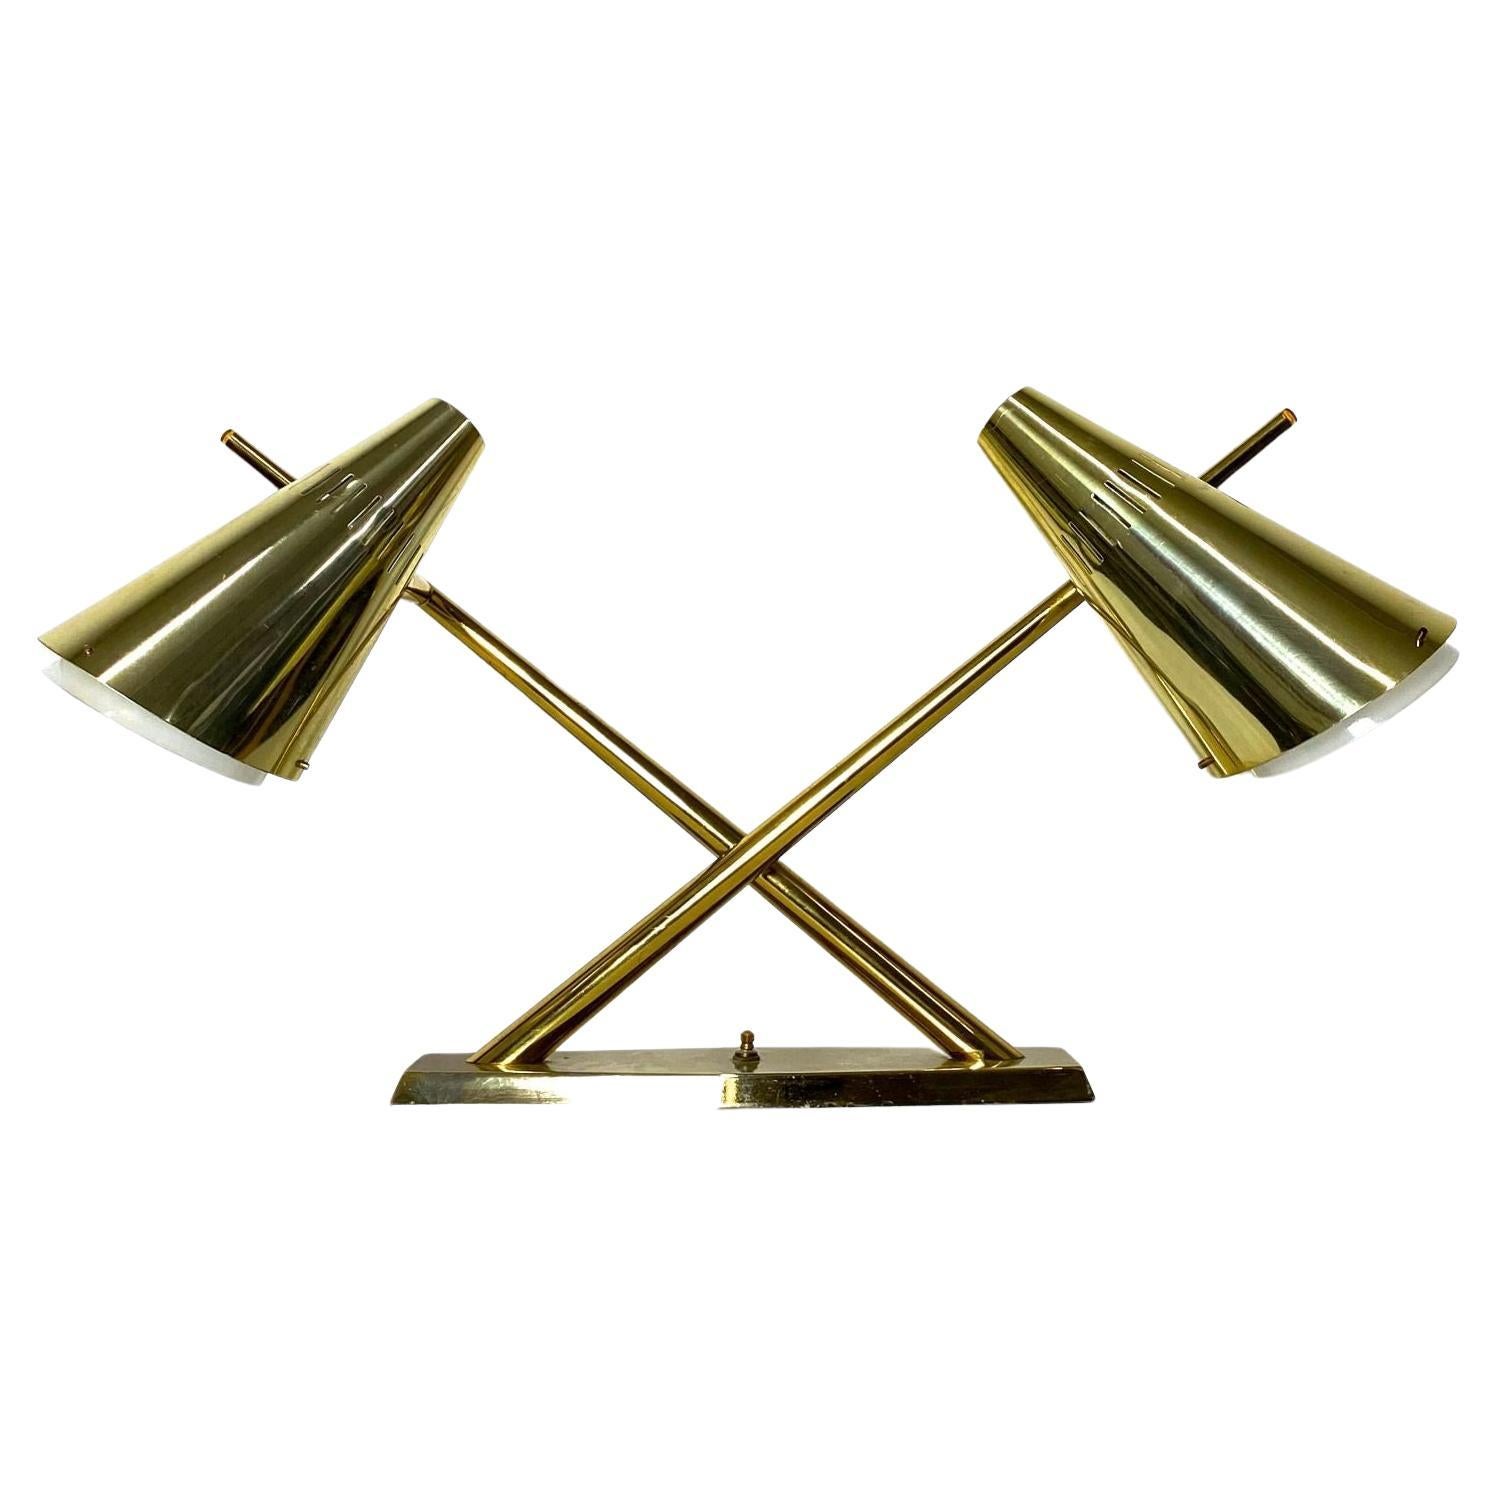 Laurel Brass and Glass Dual Cone Desk Lamp 1960s

Rare articulated shade desk lamp by Laurel Lamp Company circa the 1960s
X form design with dual cone shades in brass over opaque glass diffuser
360 degree pivot joint for custom directional